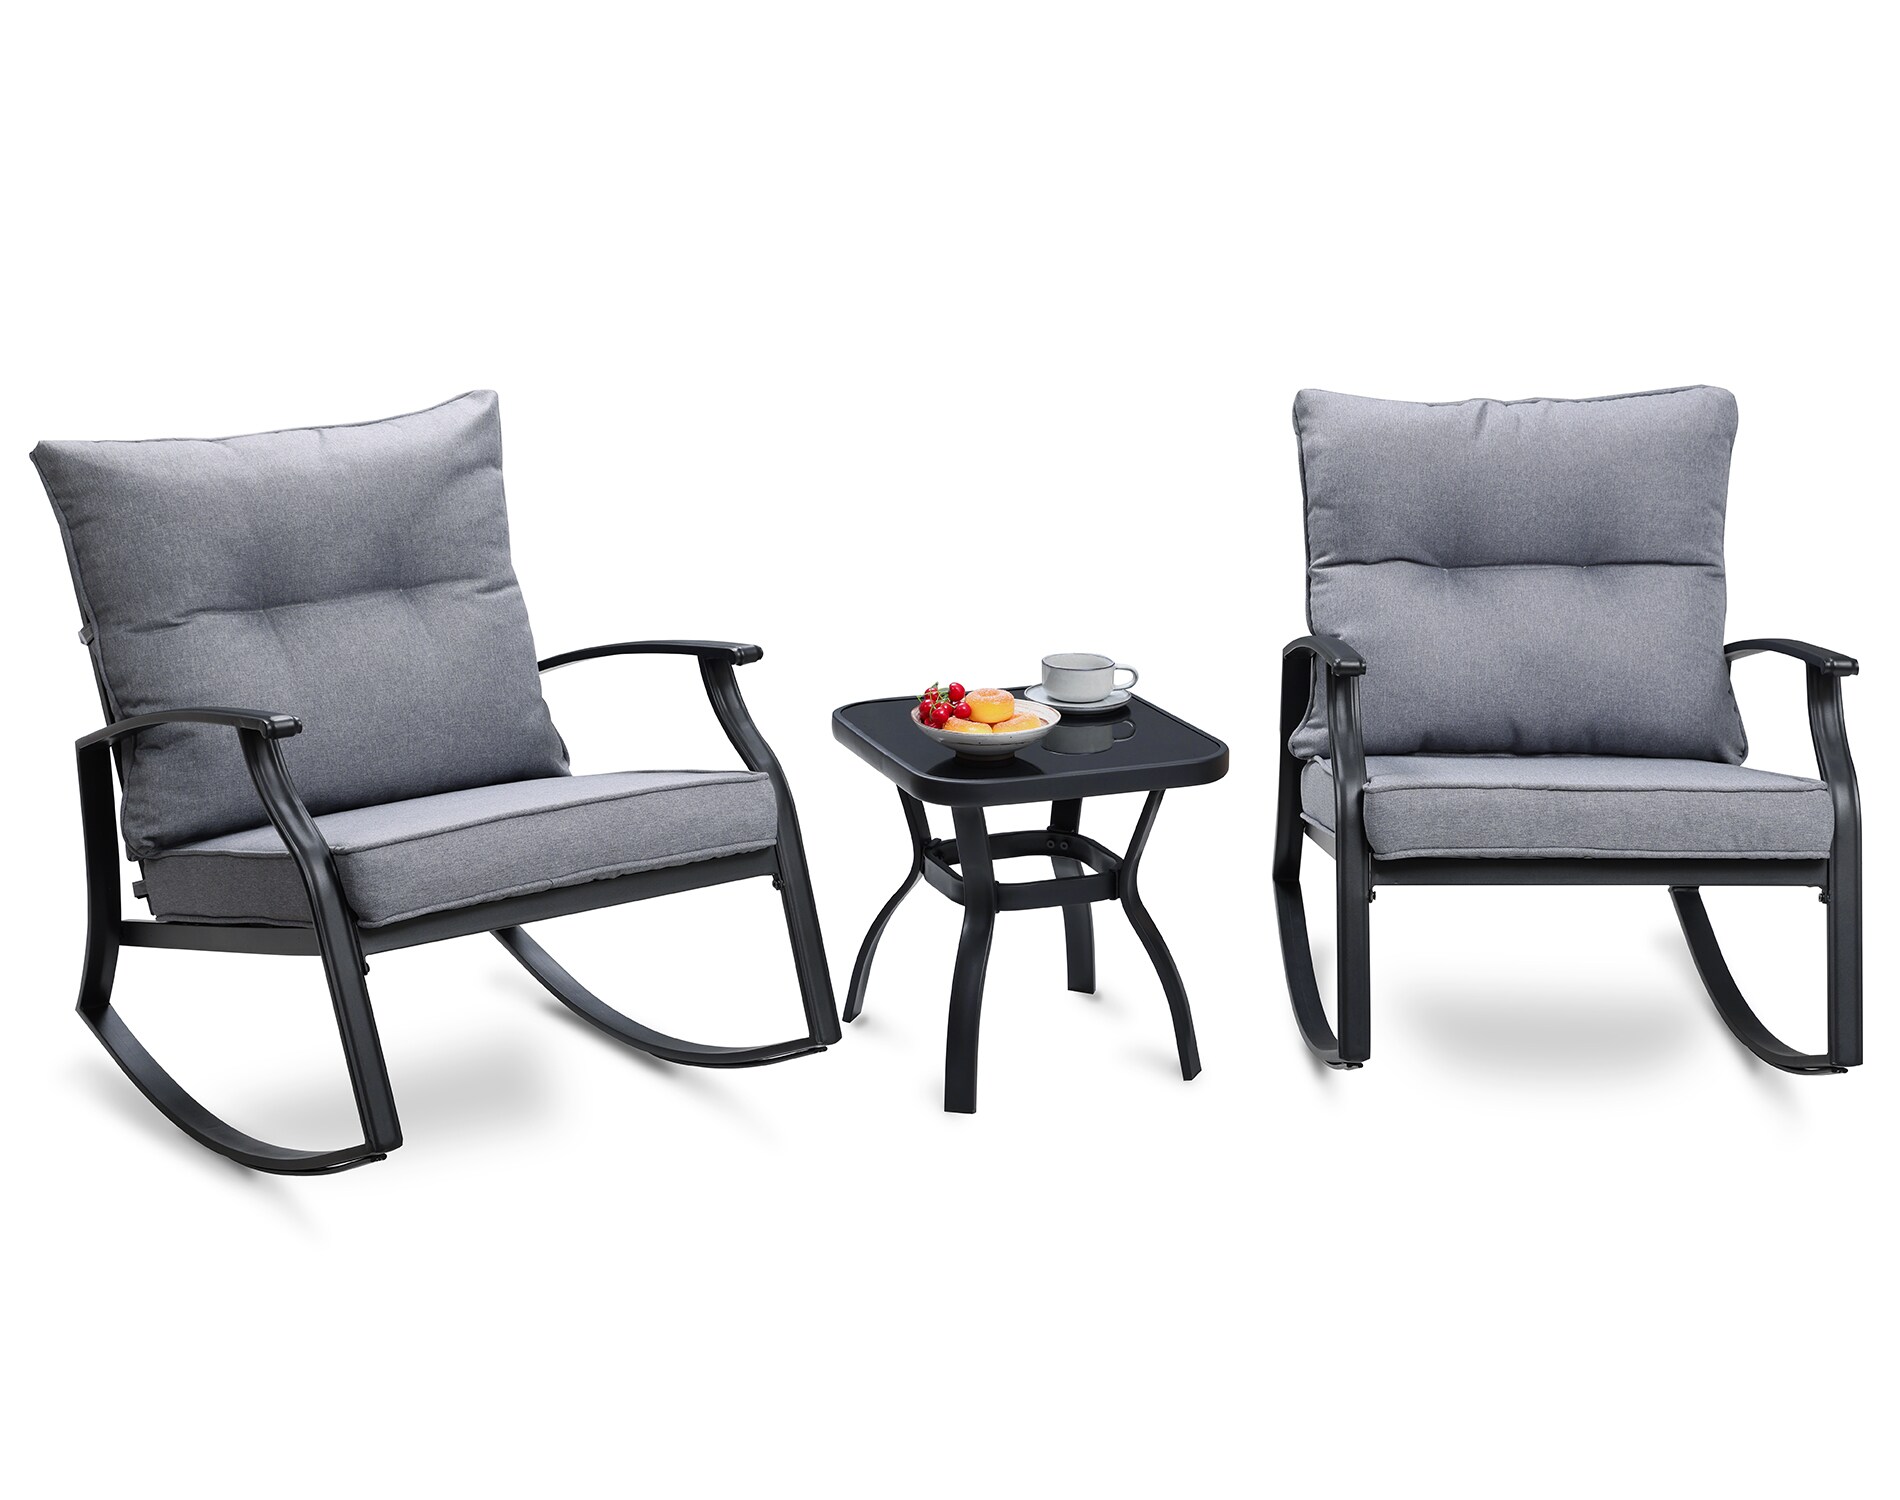 SOLAURA Outdoor Furniture 3 Piece Bistro Patio Dining Set Wrought Iron Frame Peacock Blue Cushions with Side Coffee Table 